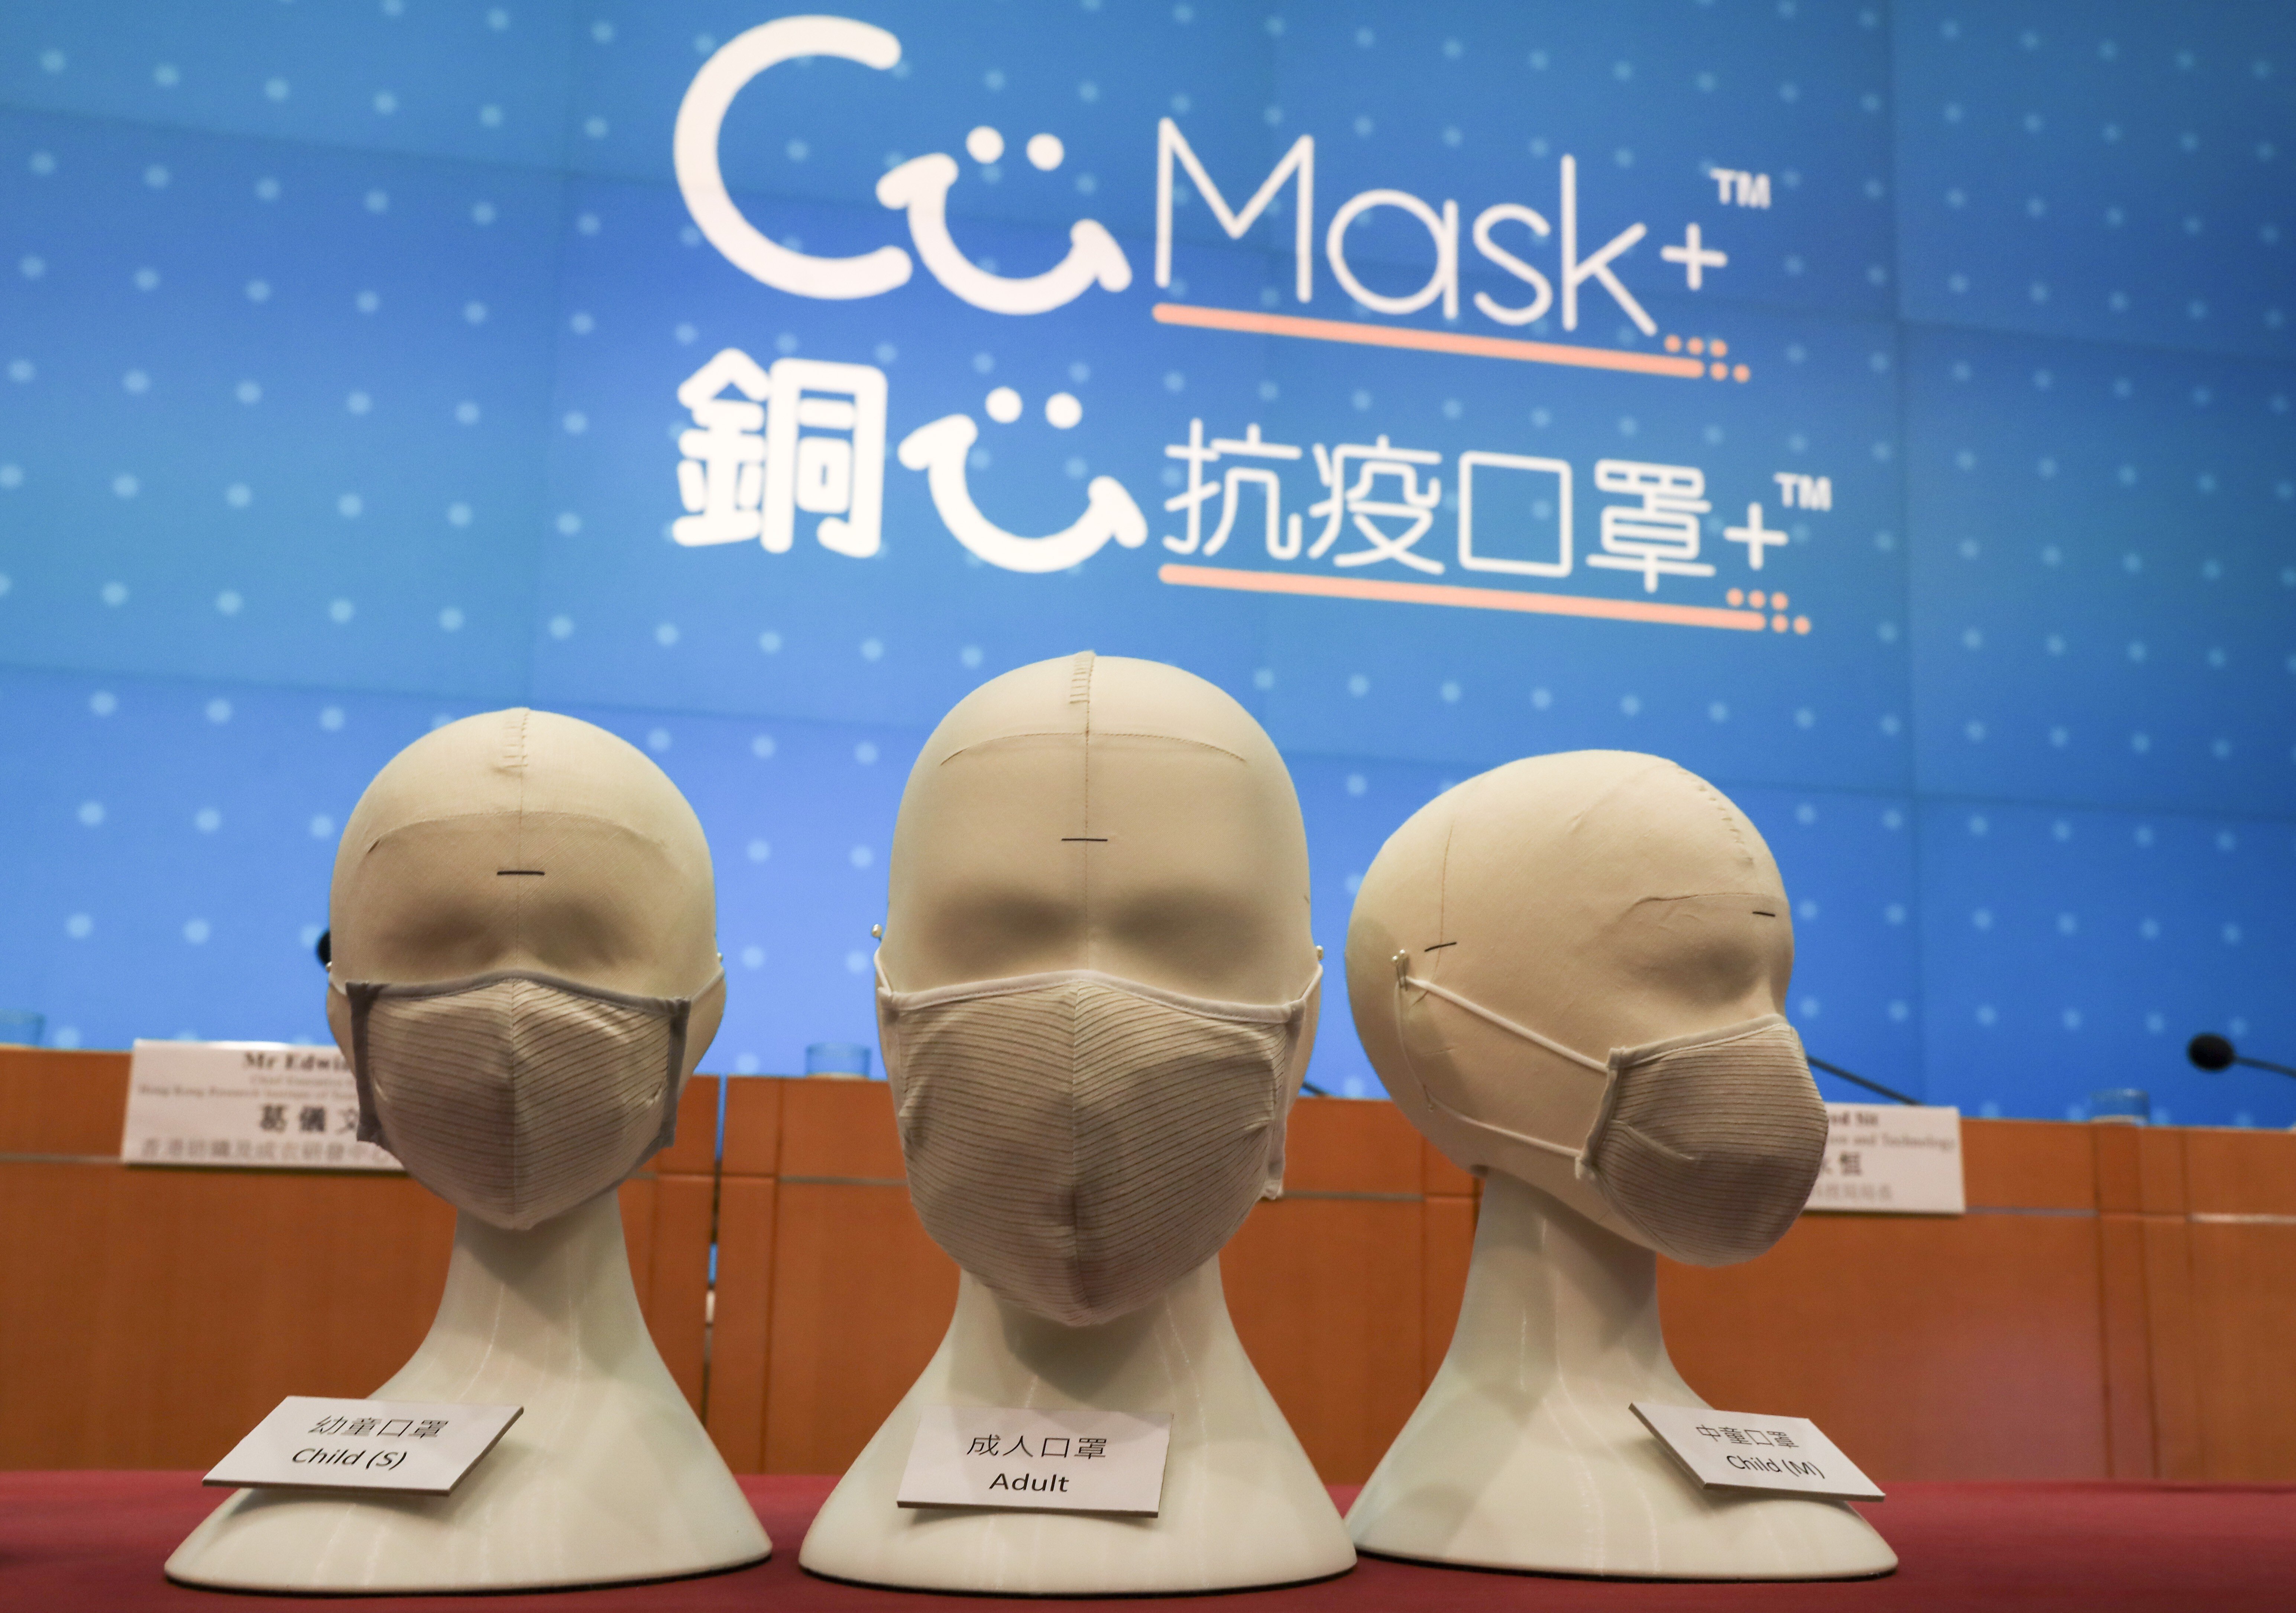 Millions of Hongkongers are expected to receive one of these masks in the coming weeks. Photo: May Tse